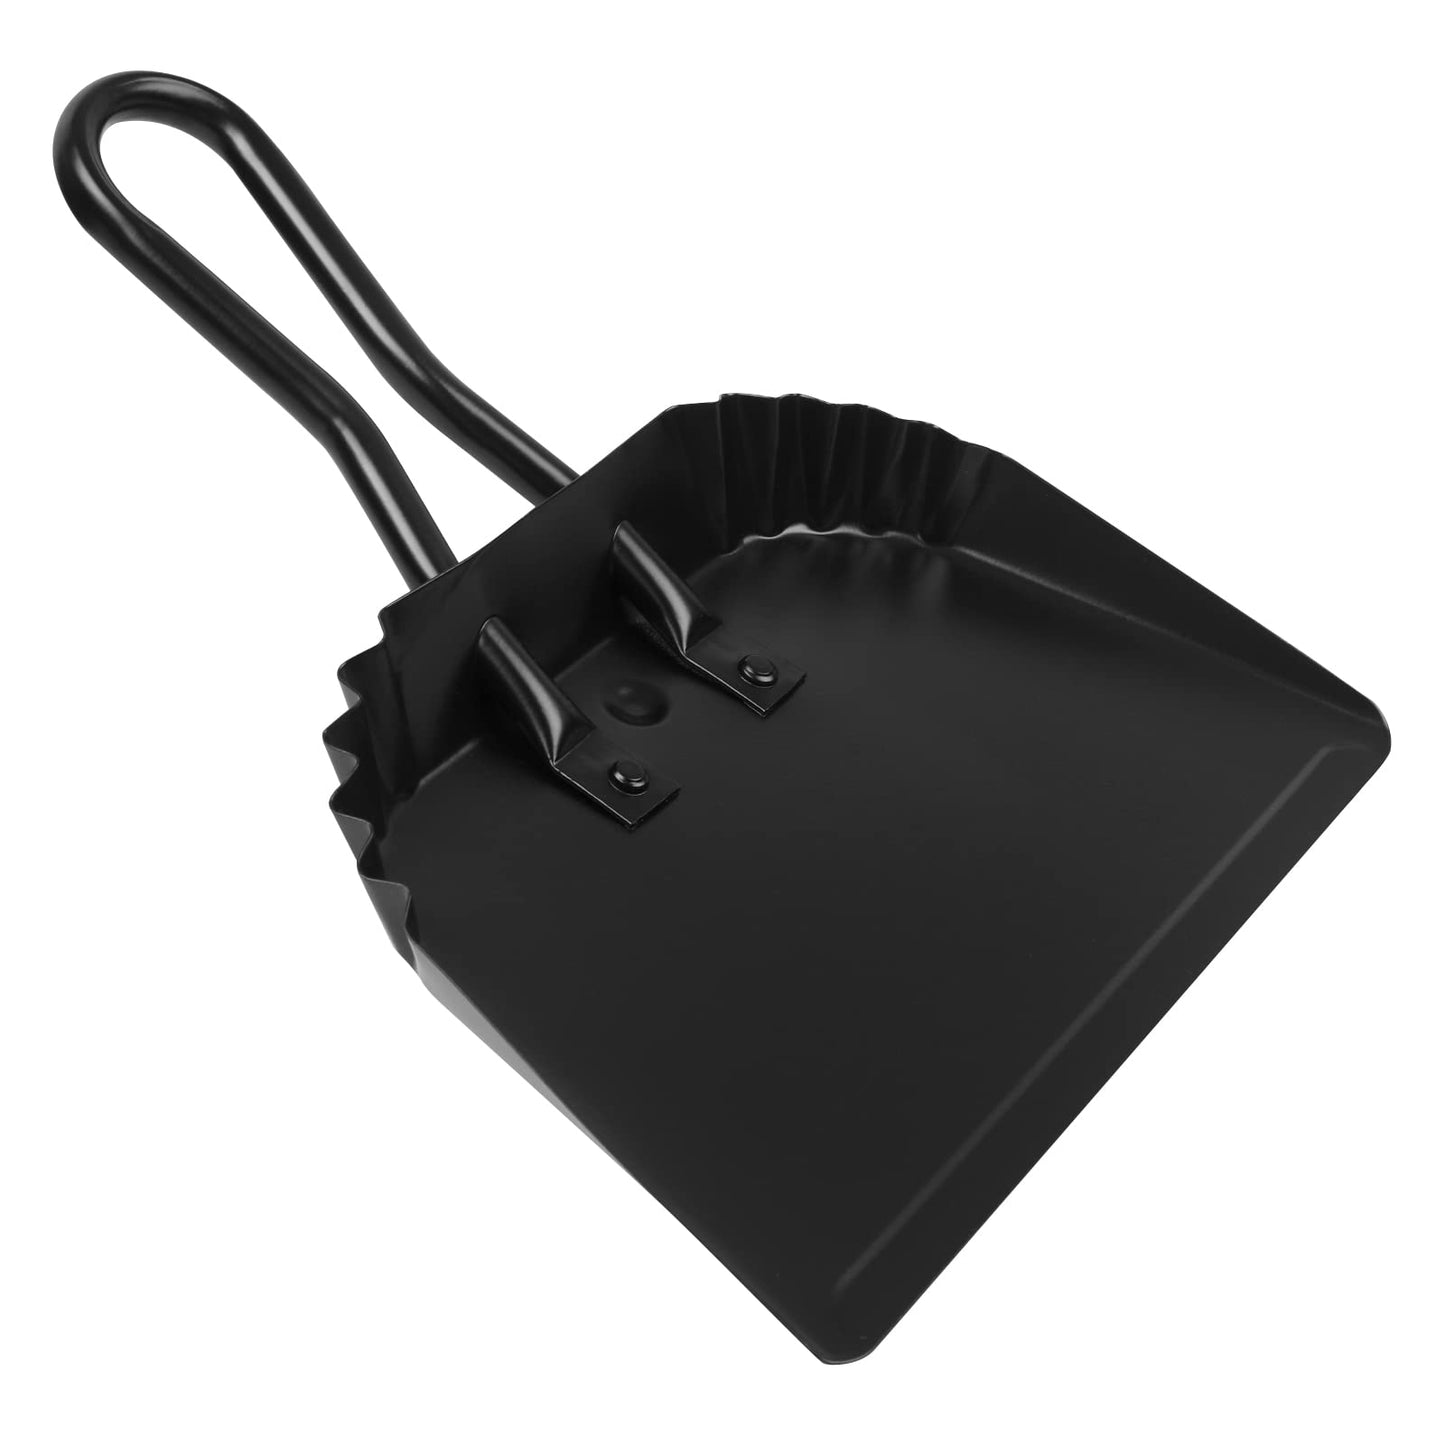 Heavy Duty Black Metal Dust Pan -Handheld Dustpan with Handle, Stainless Steel Large Dustpans with Wide Lip Industrial Dust Pans Precision Edge Small